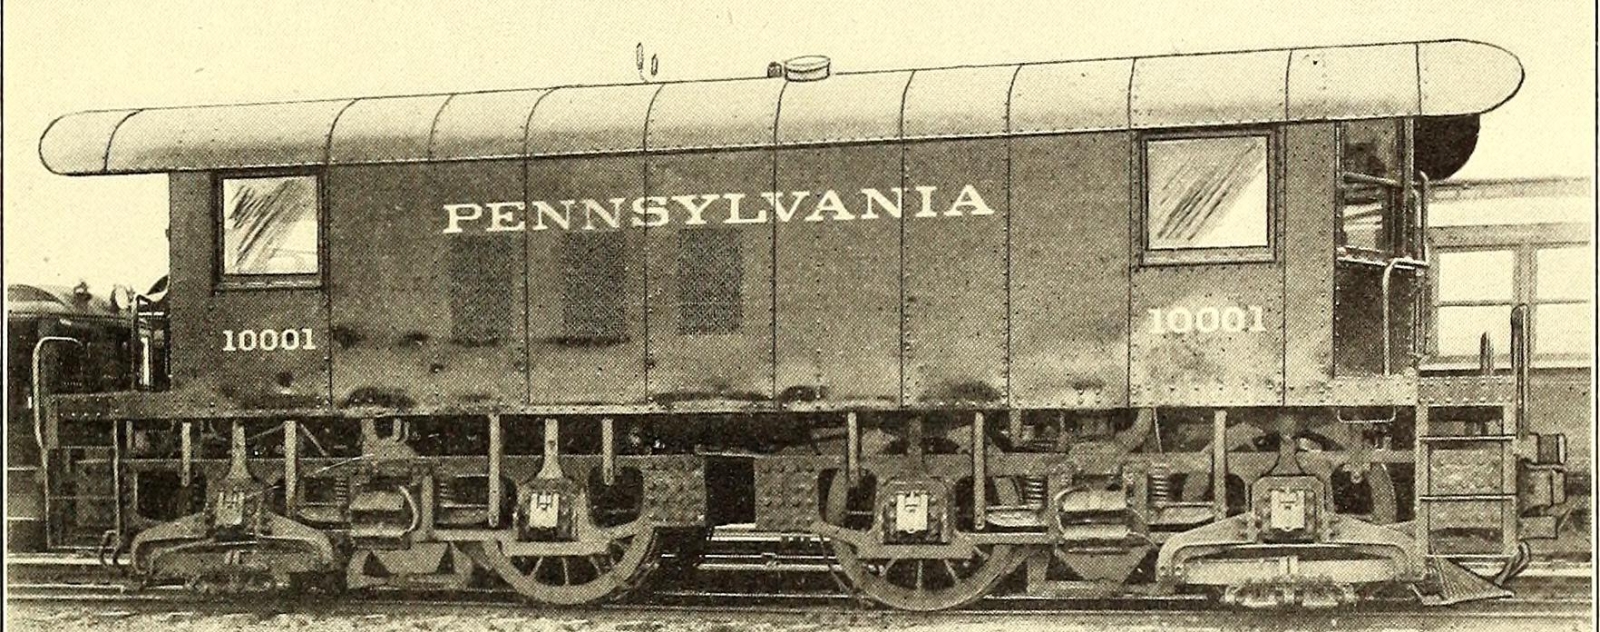 Illustration of 10001 from the Street Railway Journal of February 24, 1906